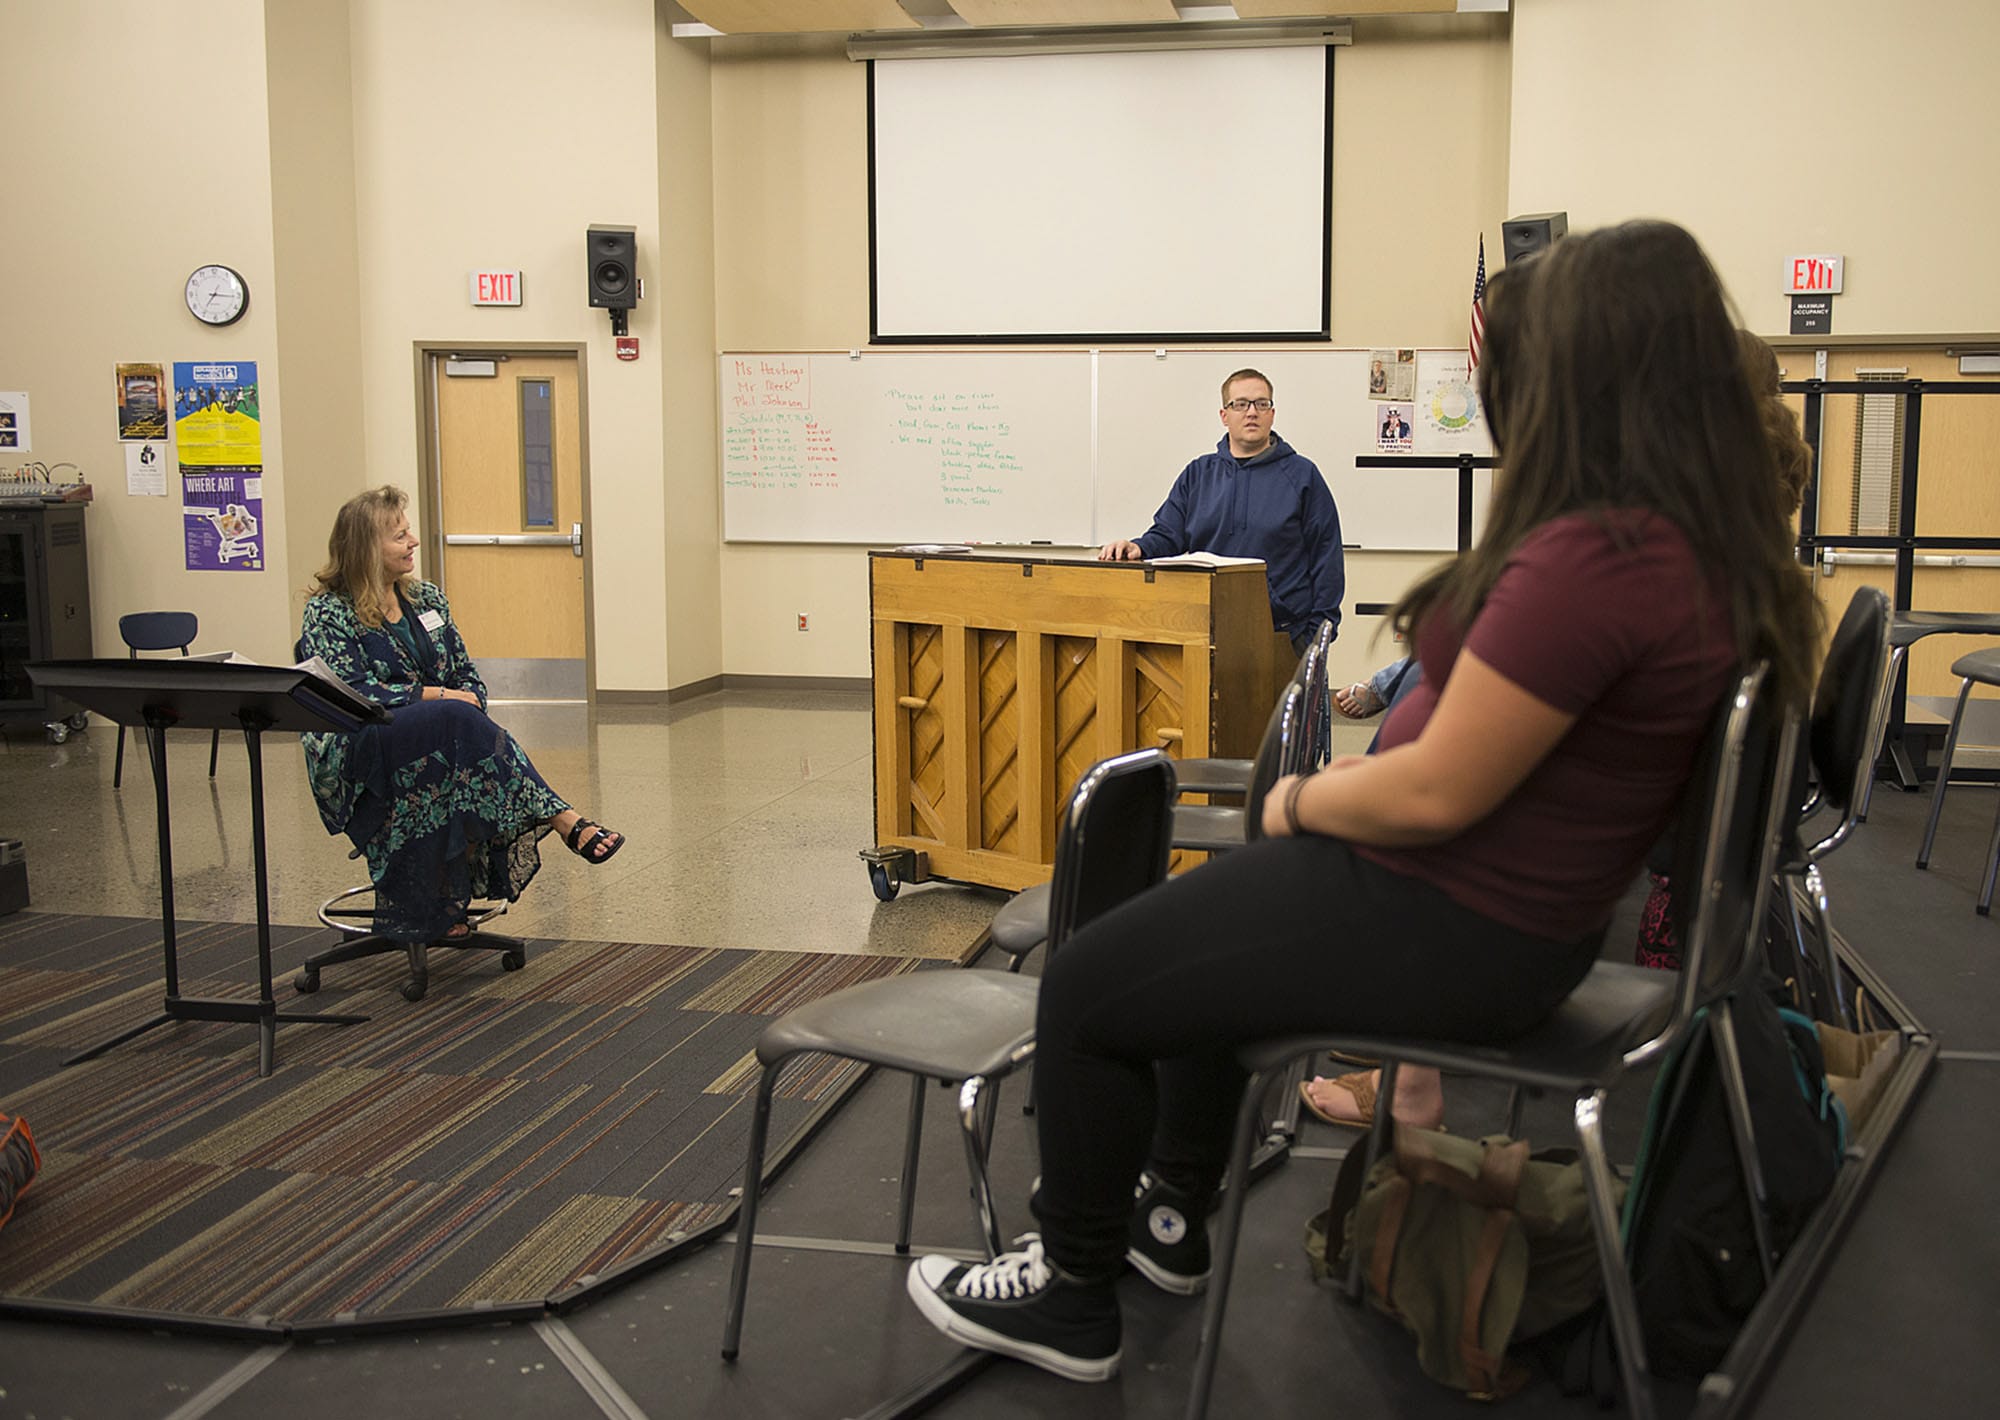 Long term substitute choir and drama teacher Deanna Hasting, left, joins students as they listen to their choir and drama teacher, Bob Meek, center, during choir practice Tuesday morning, Sept. 2, 2015.